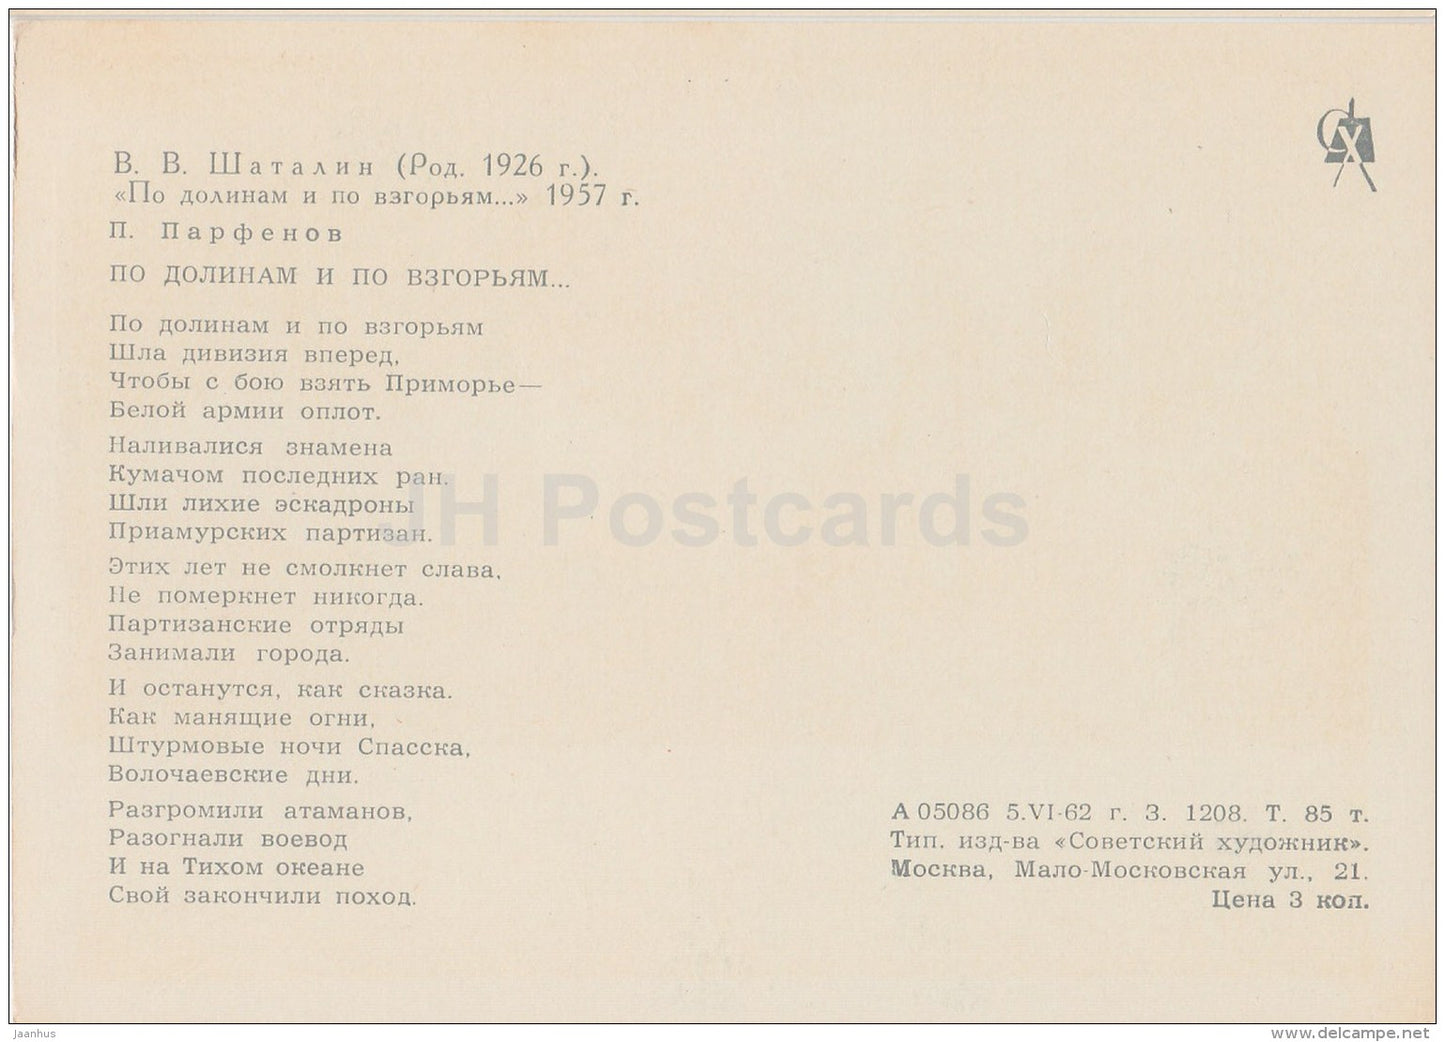 illustration by V. Shatalin - soldiers - horses - Red Army - Songs of Civil War - 1962 - Russia USSR - unused - JH Postcards